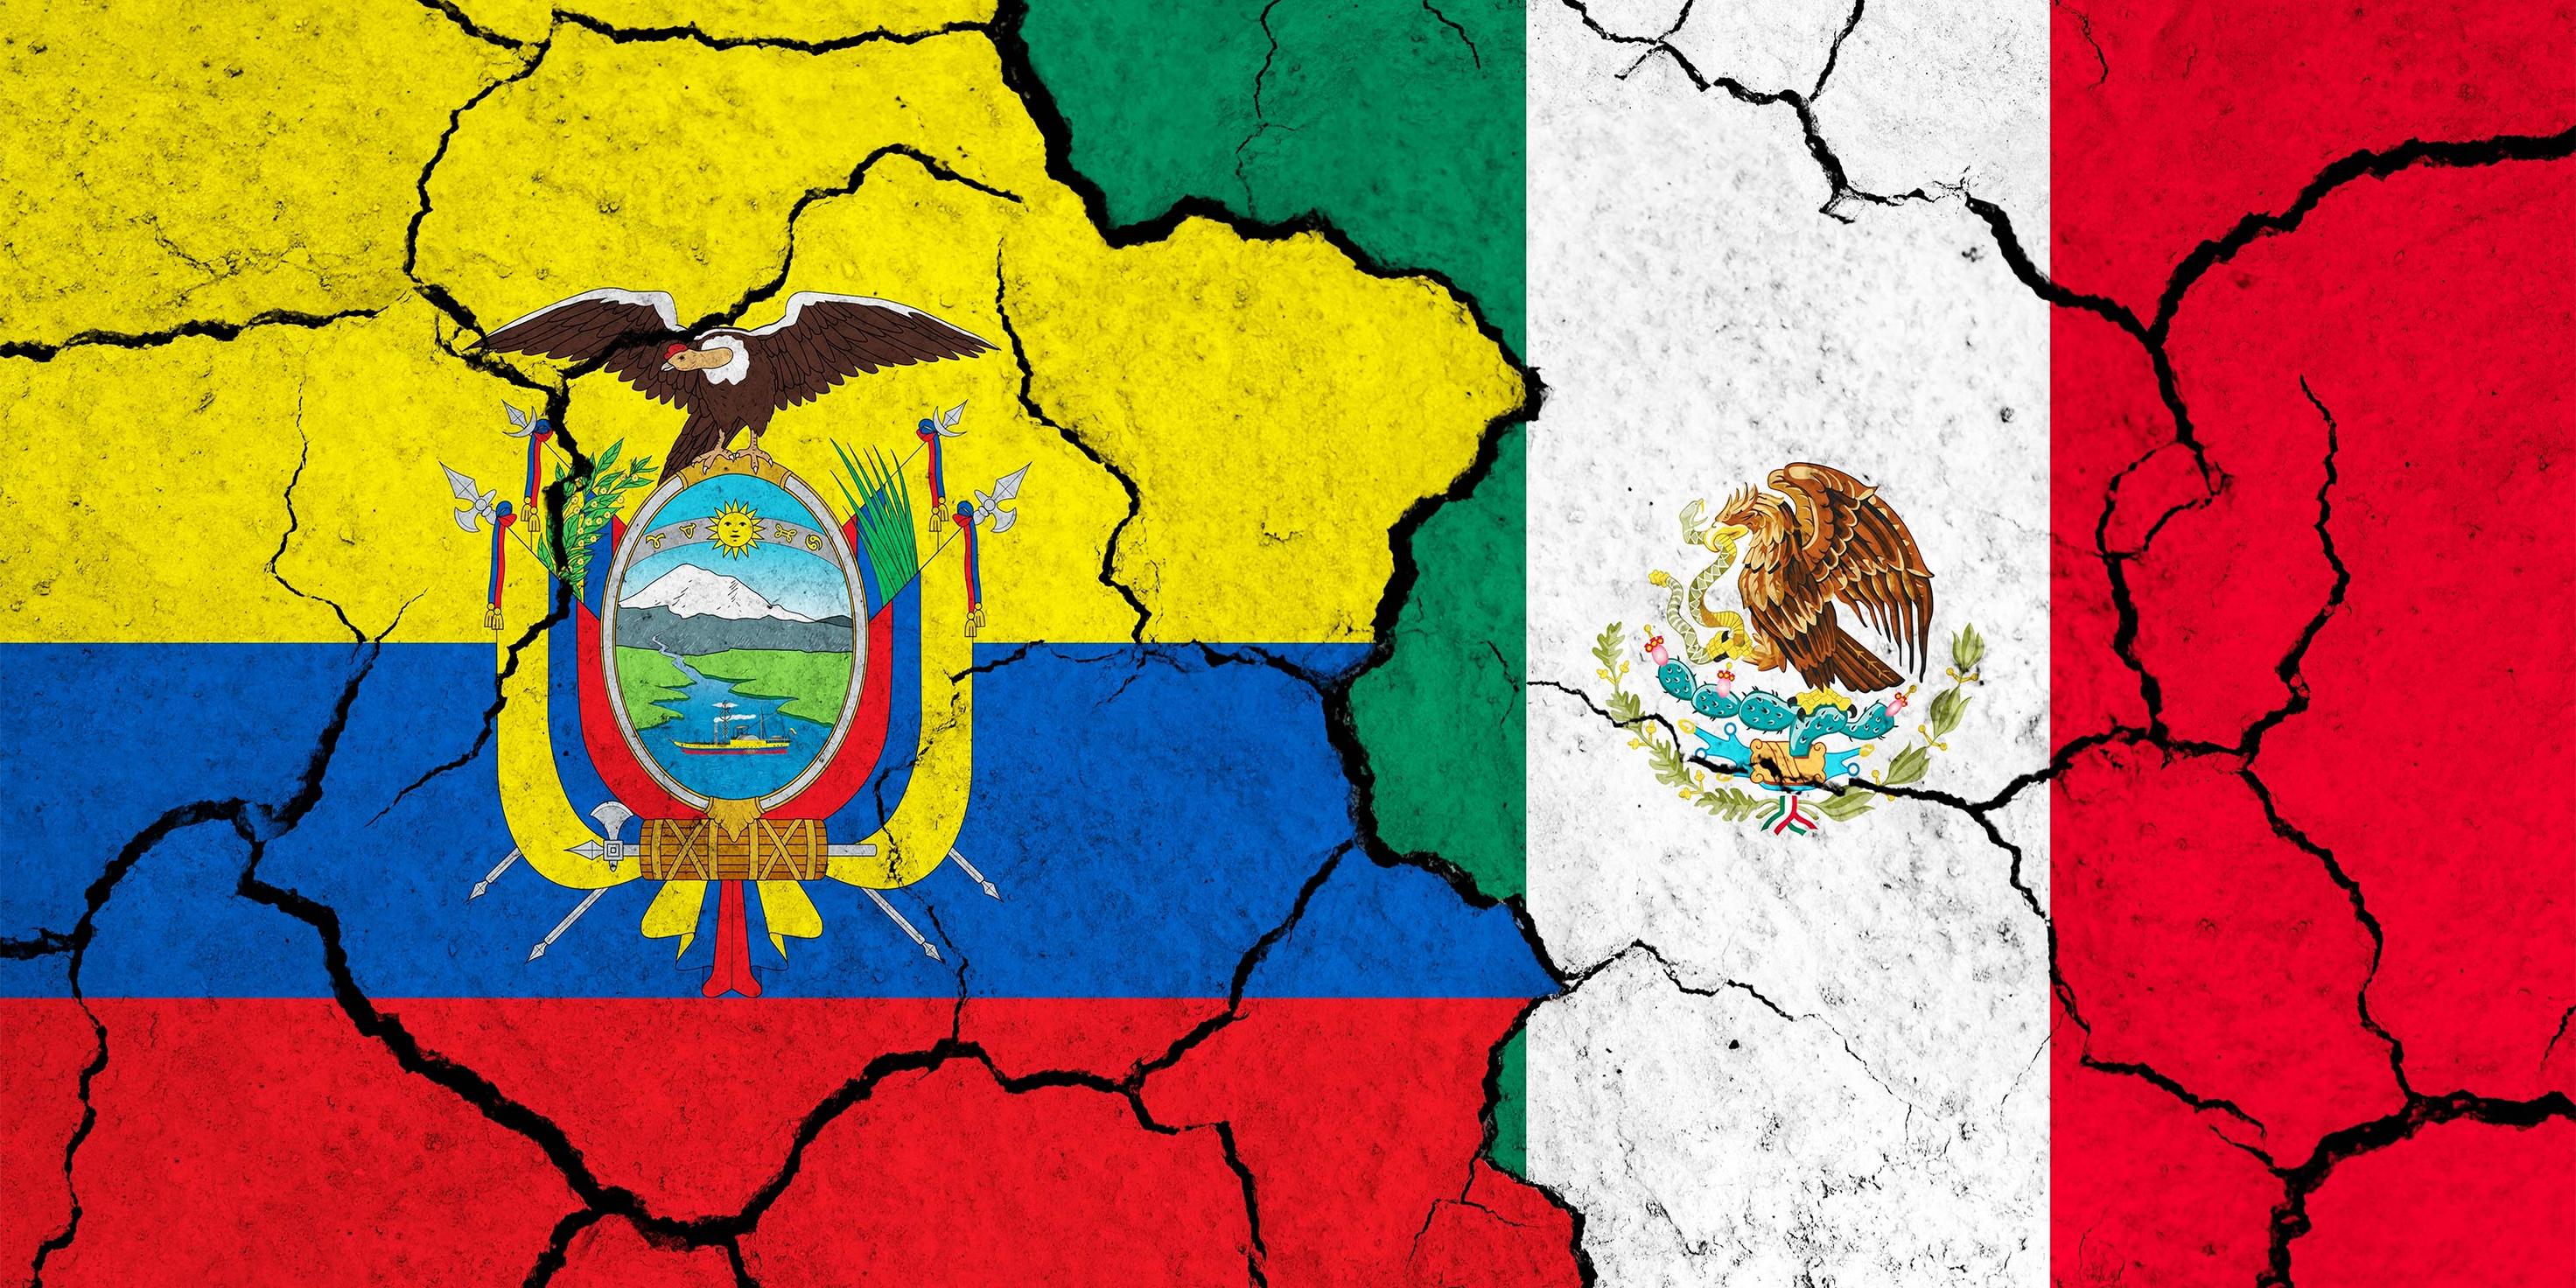 How the Mexico-Ecuador Dispute Highlights Fragility of Latin American Relations